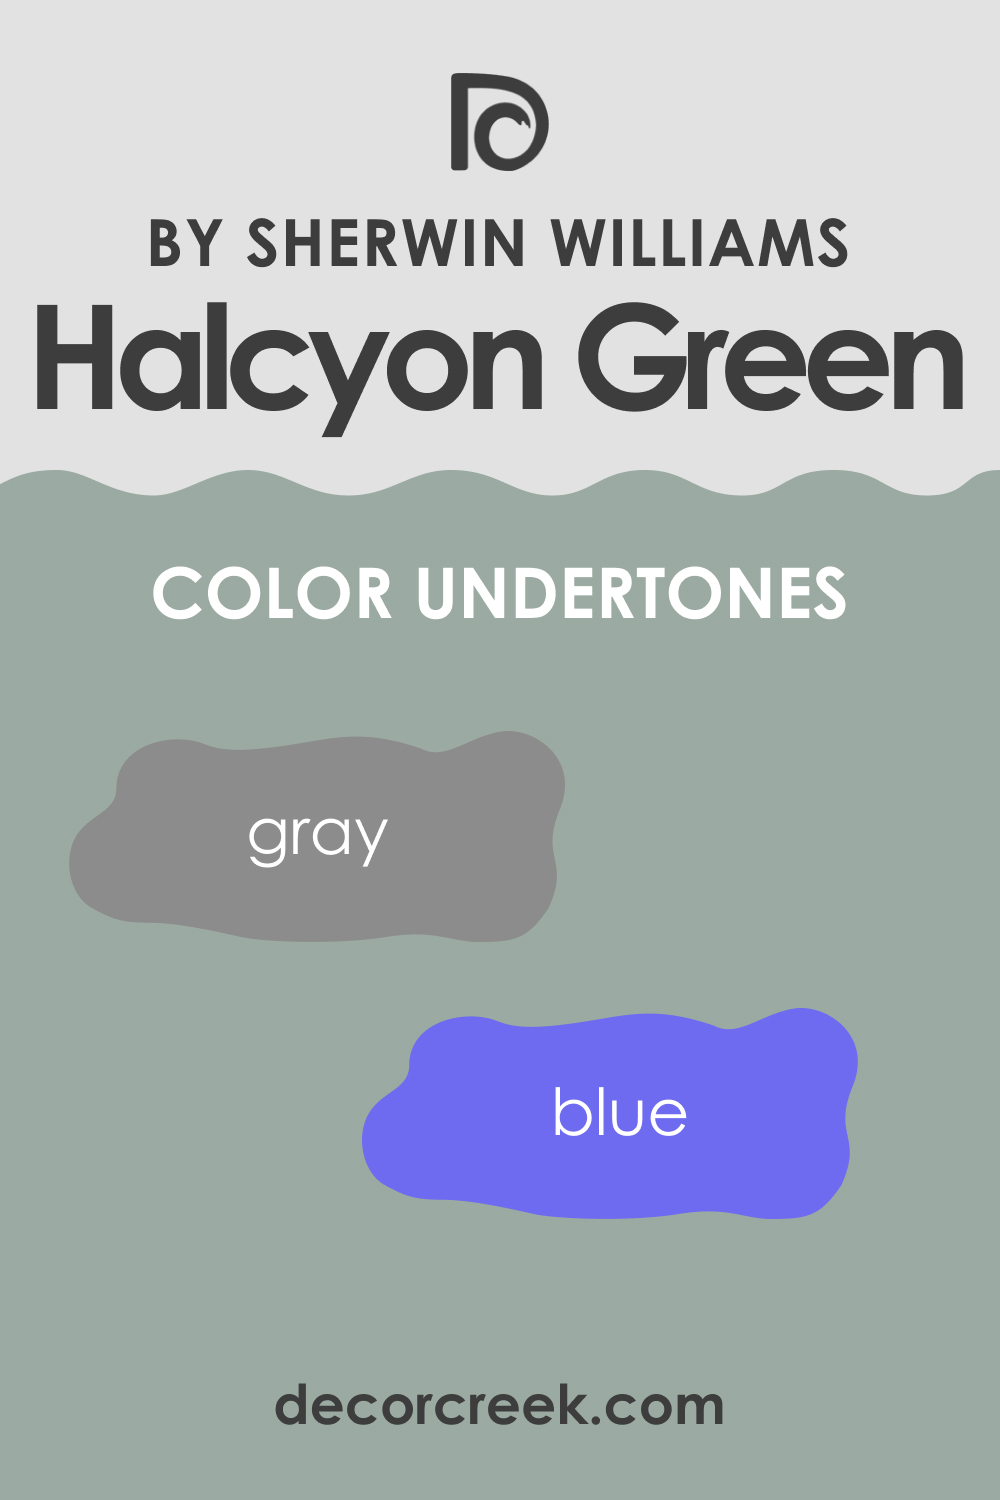 What Are the Undertones Of Sherwin-Williams Halcyon Green?